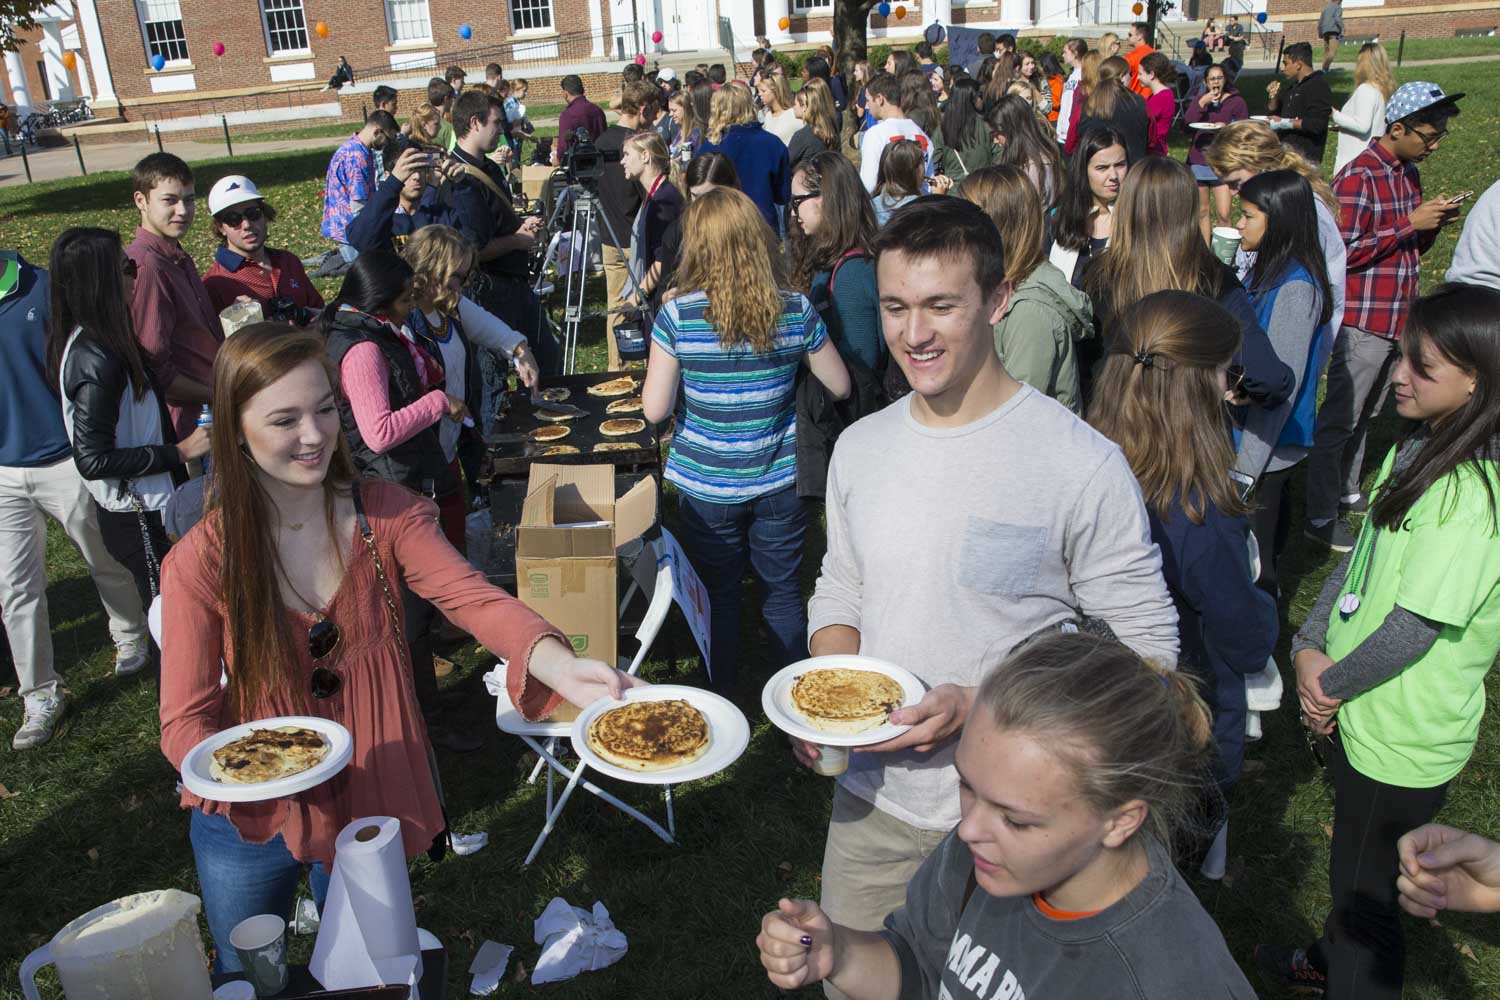 Students handing out pancakes to other students